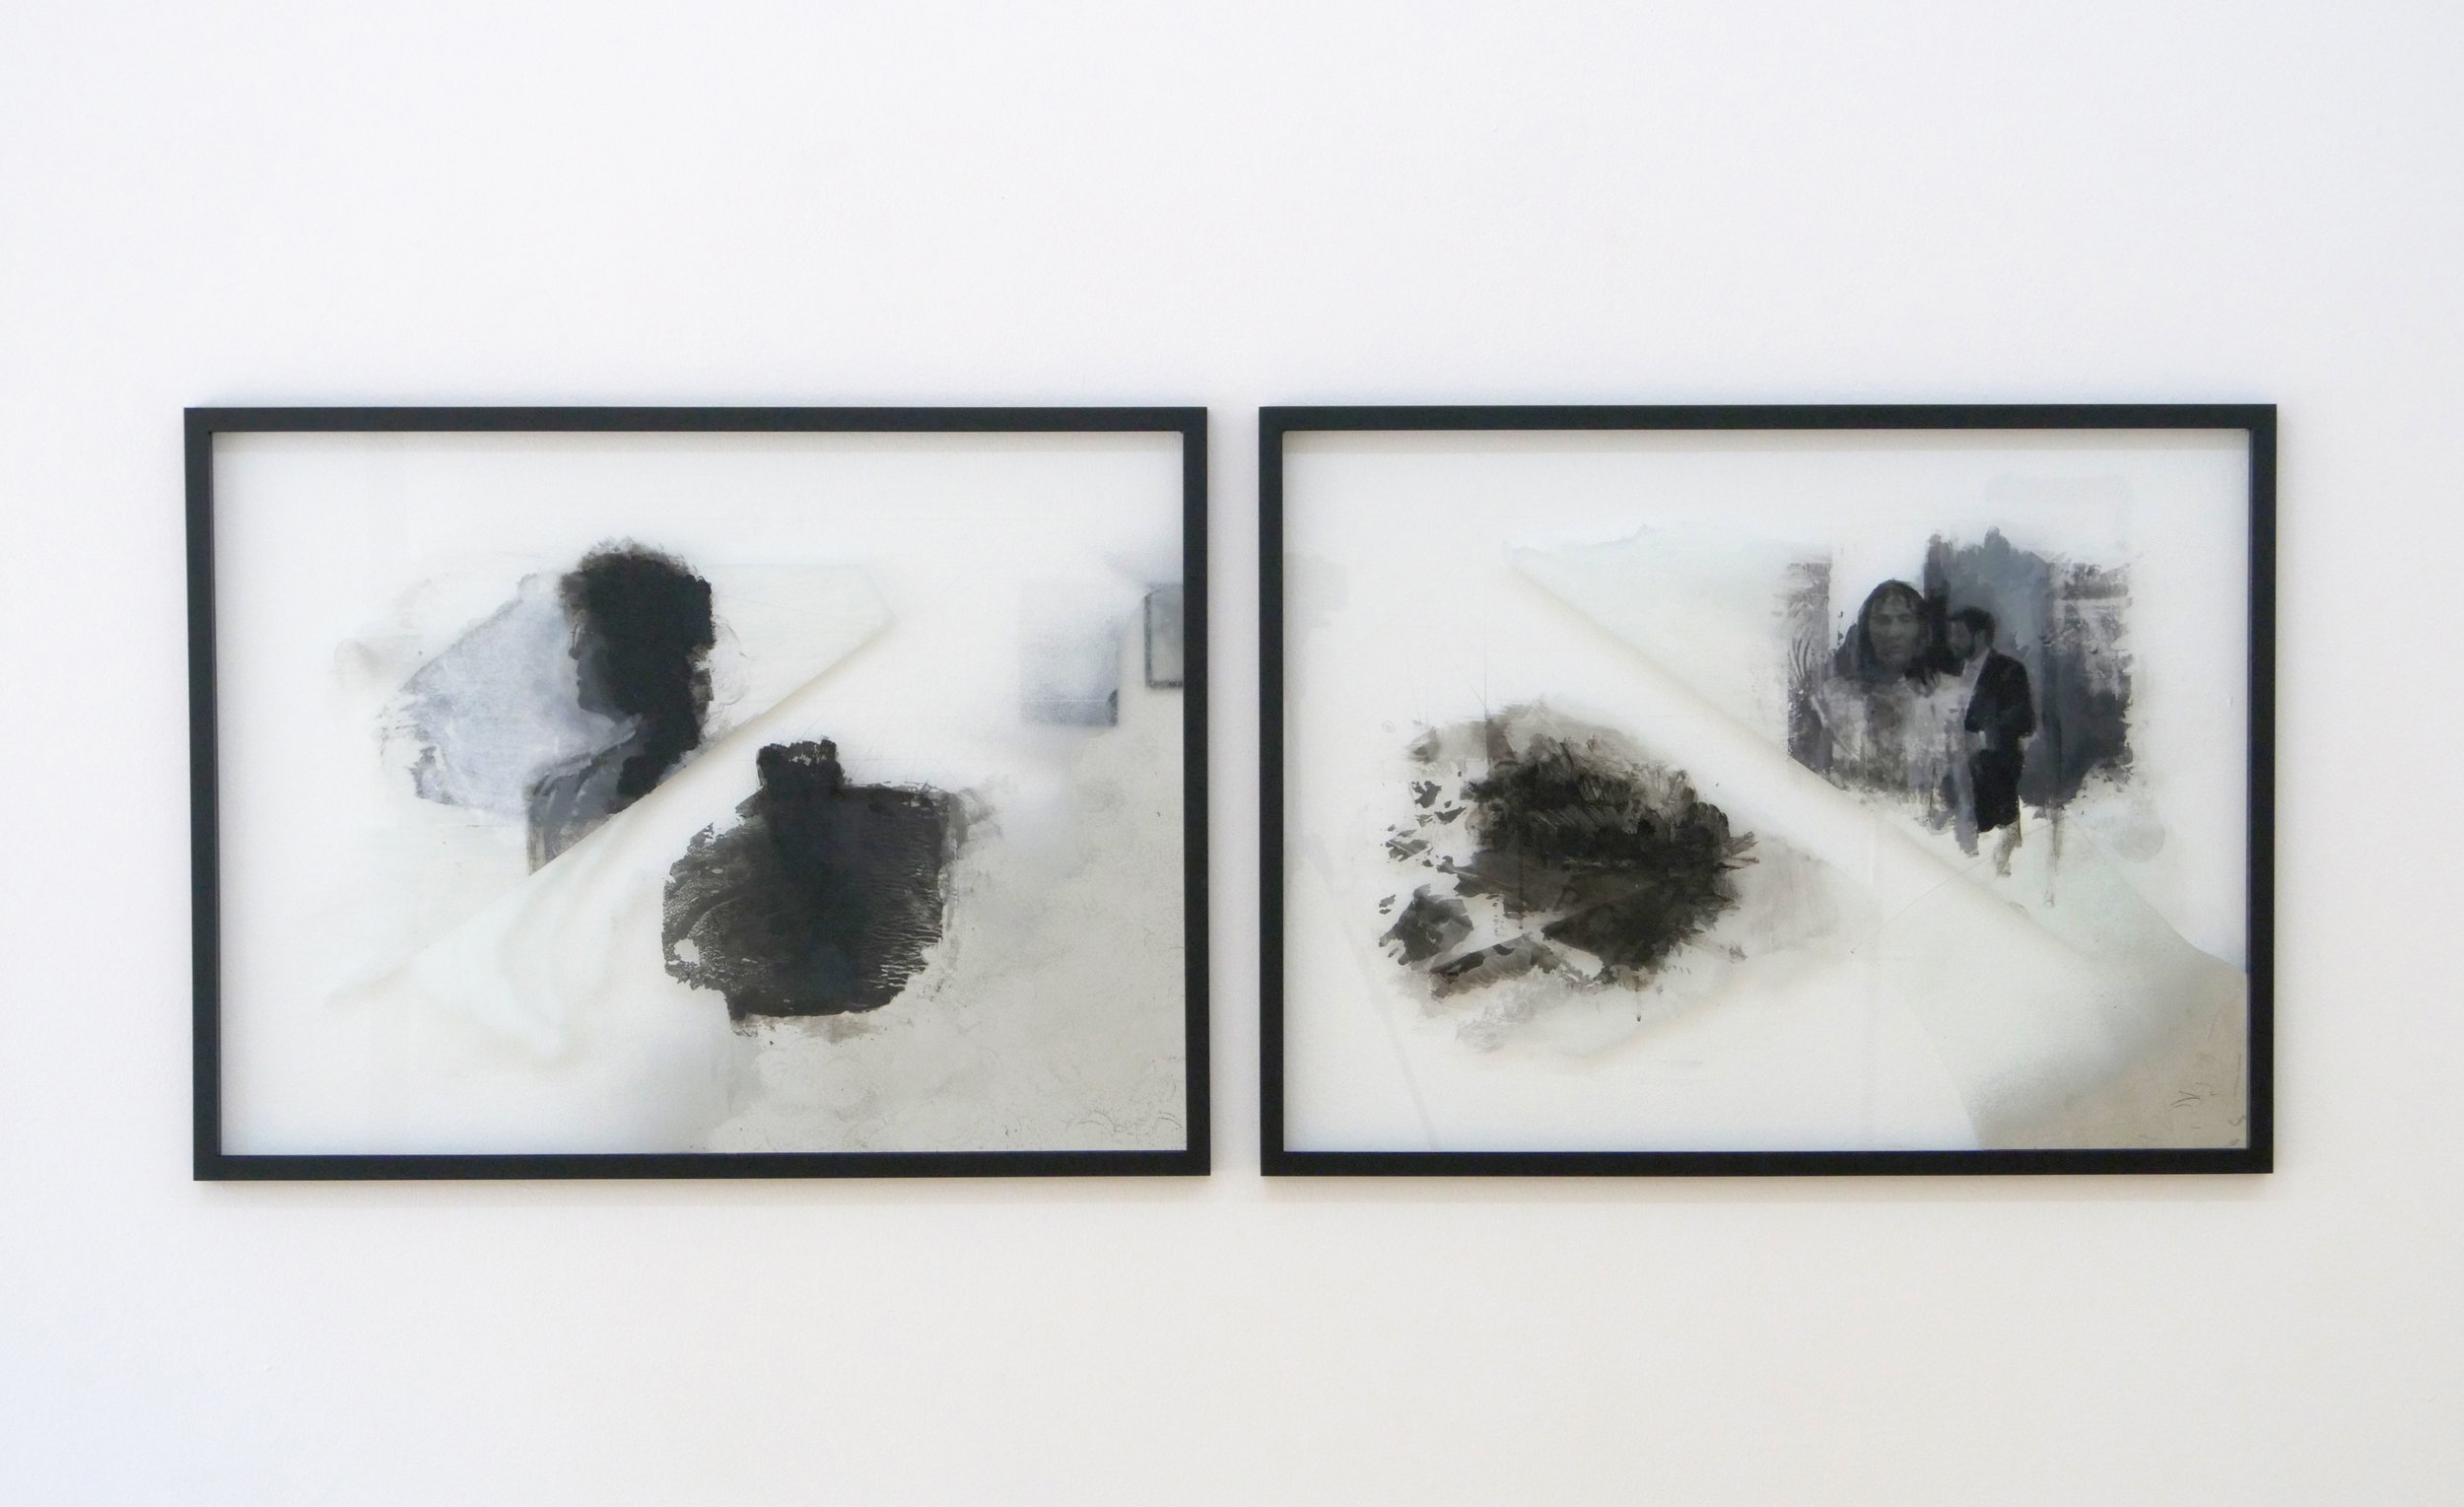  Memory of a Memory and somebody catching up with it, 2019 engraving, silver dust and oil  on glass Diptychon, each 62,7 x 82,7 cm (framed) Unique 